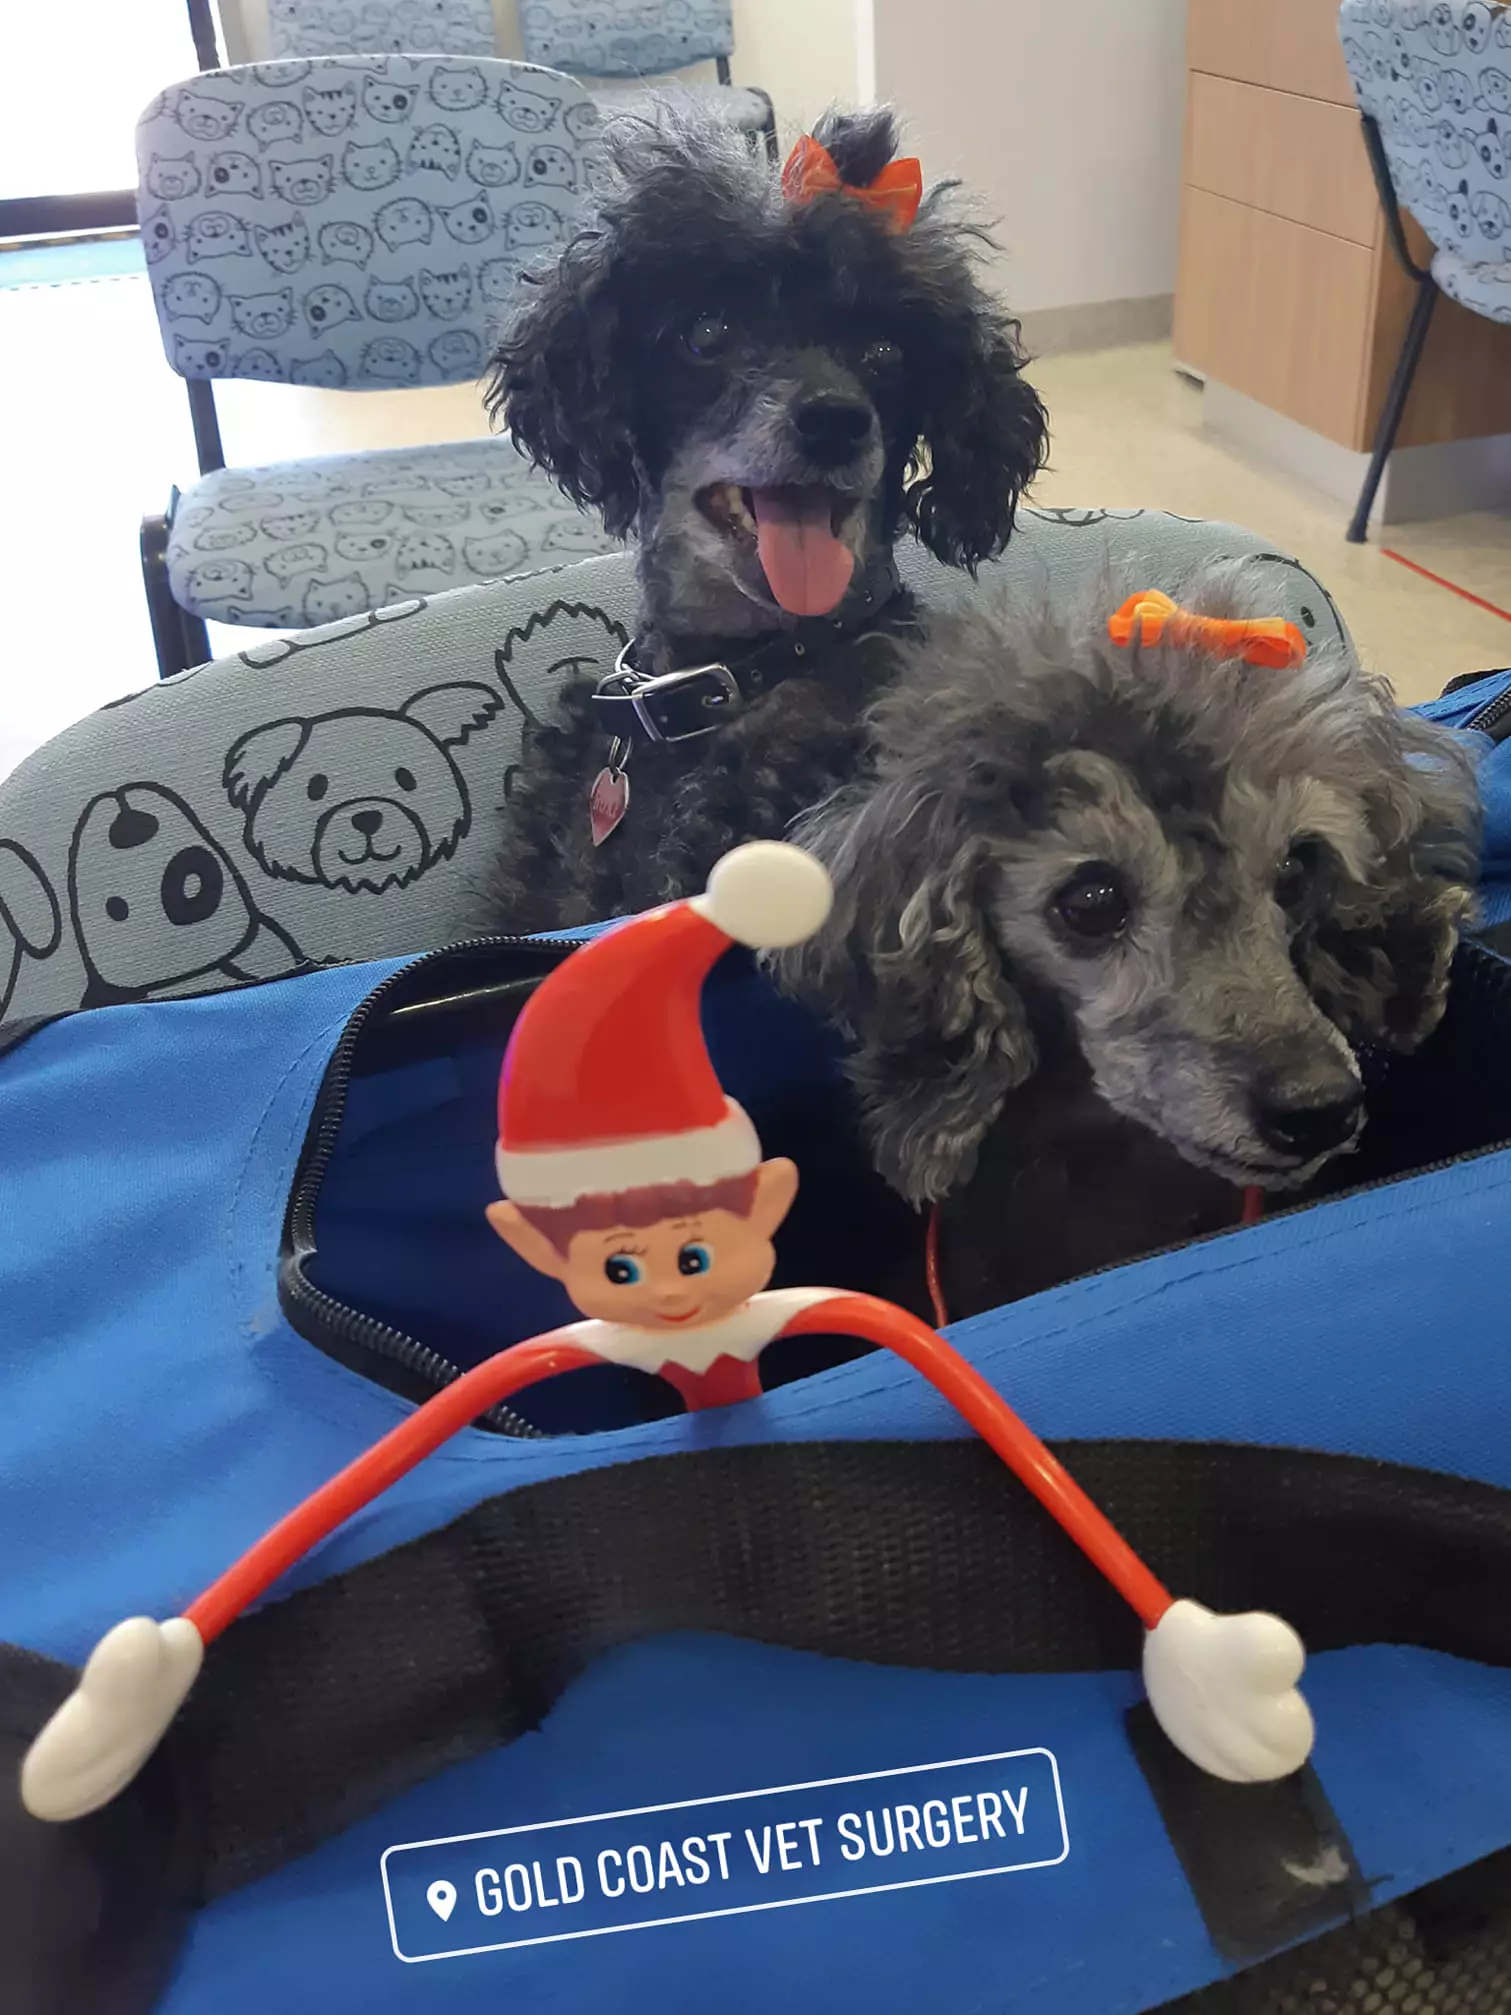 The elf has been visiting some other patients at the Gold Coast Vet Surgery too.